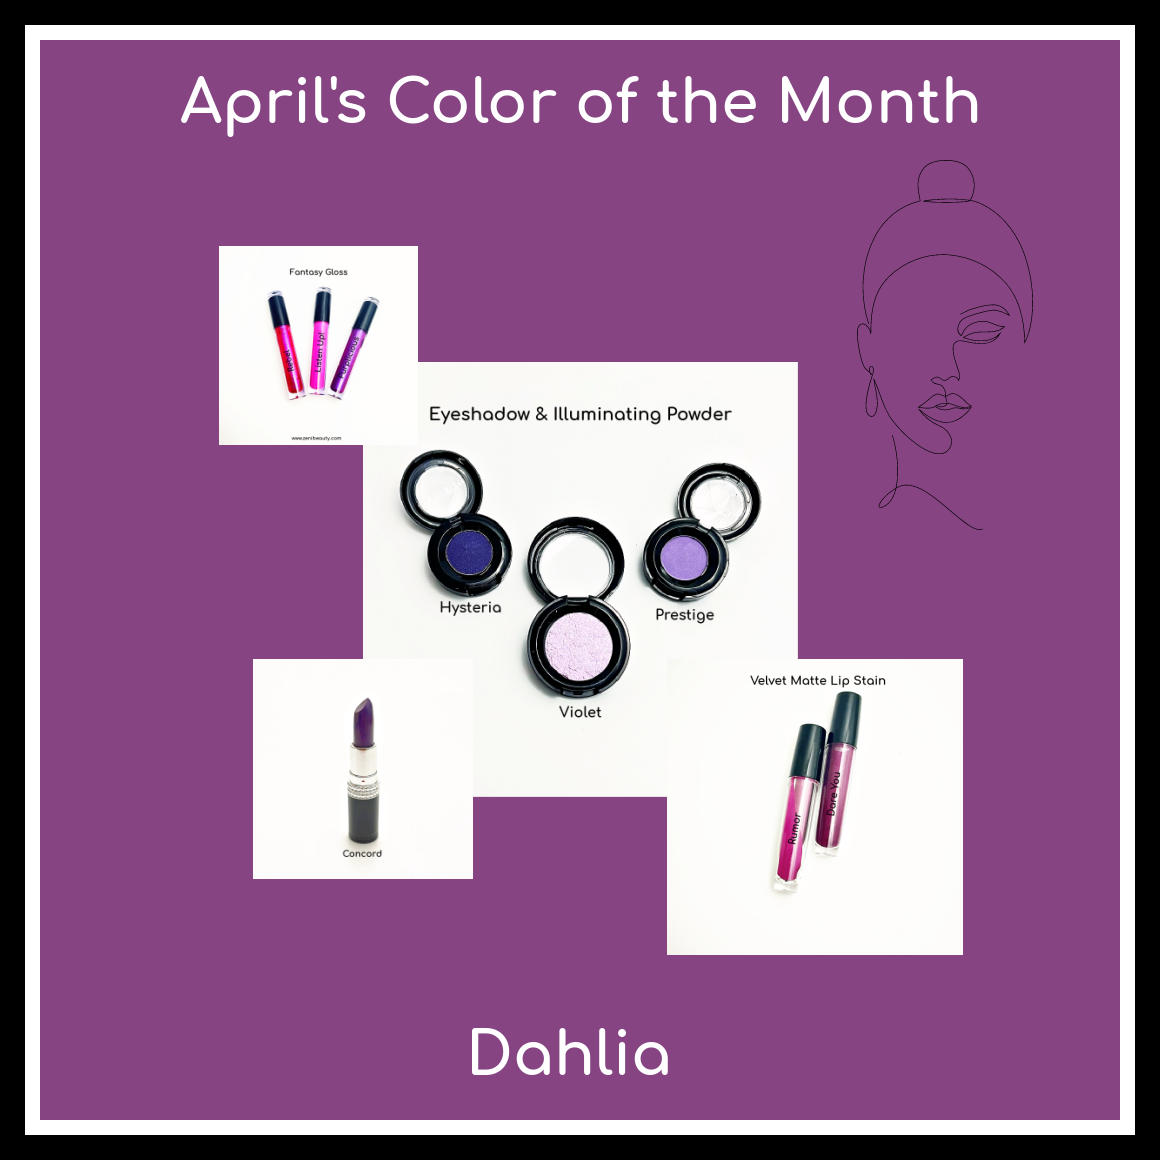 April 2022's Color of the Month is Dahlia